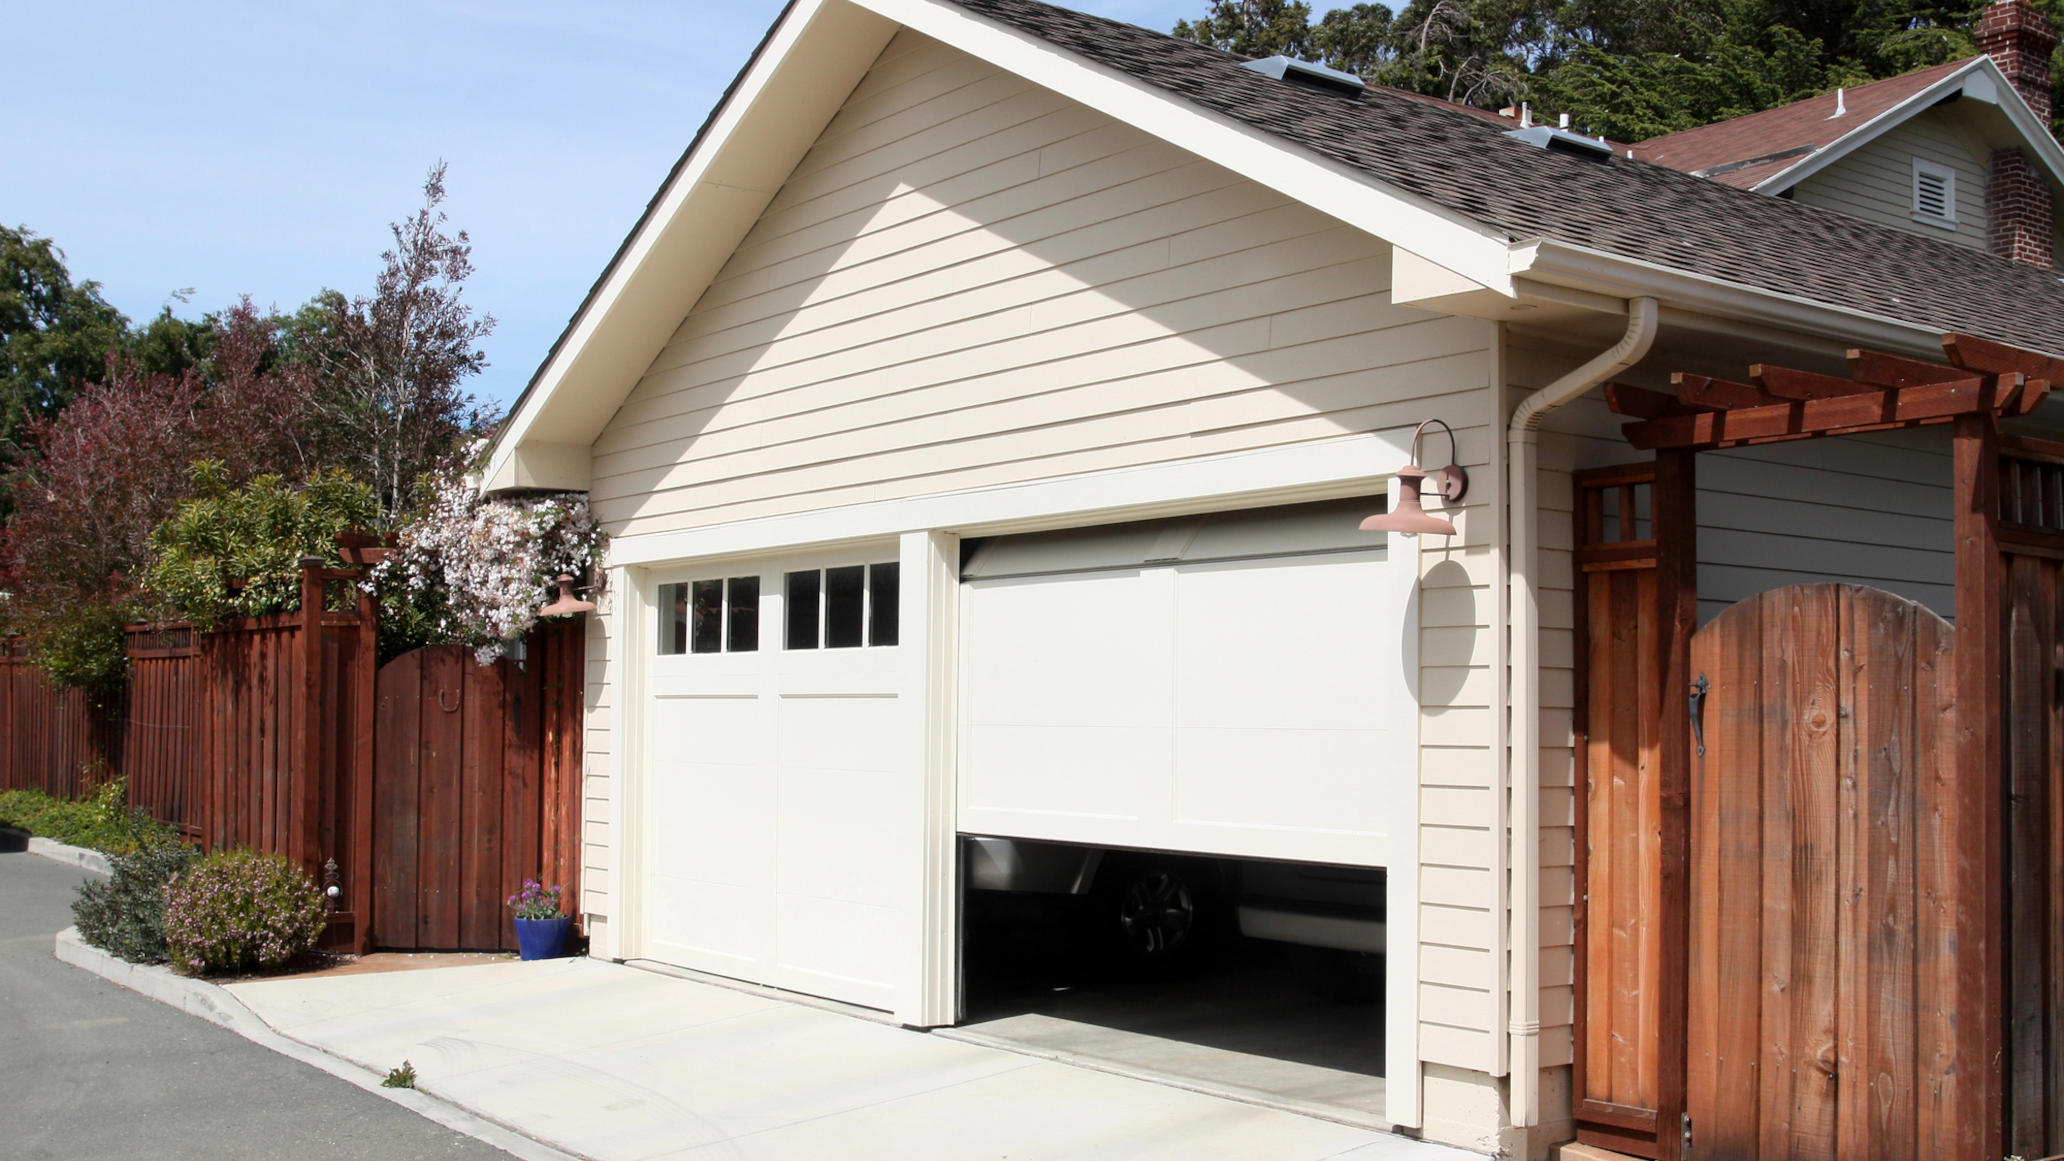 Is It Cheaper To Build A Garage Or To Buy One?